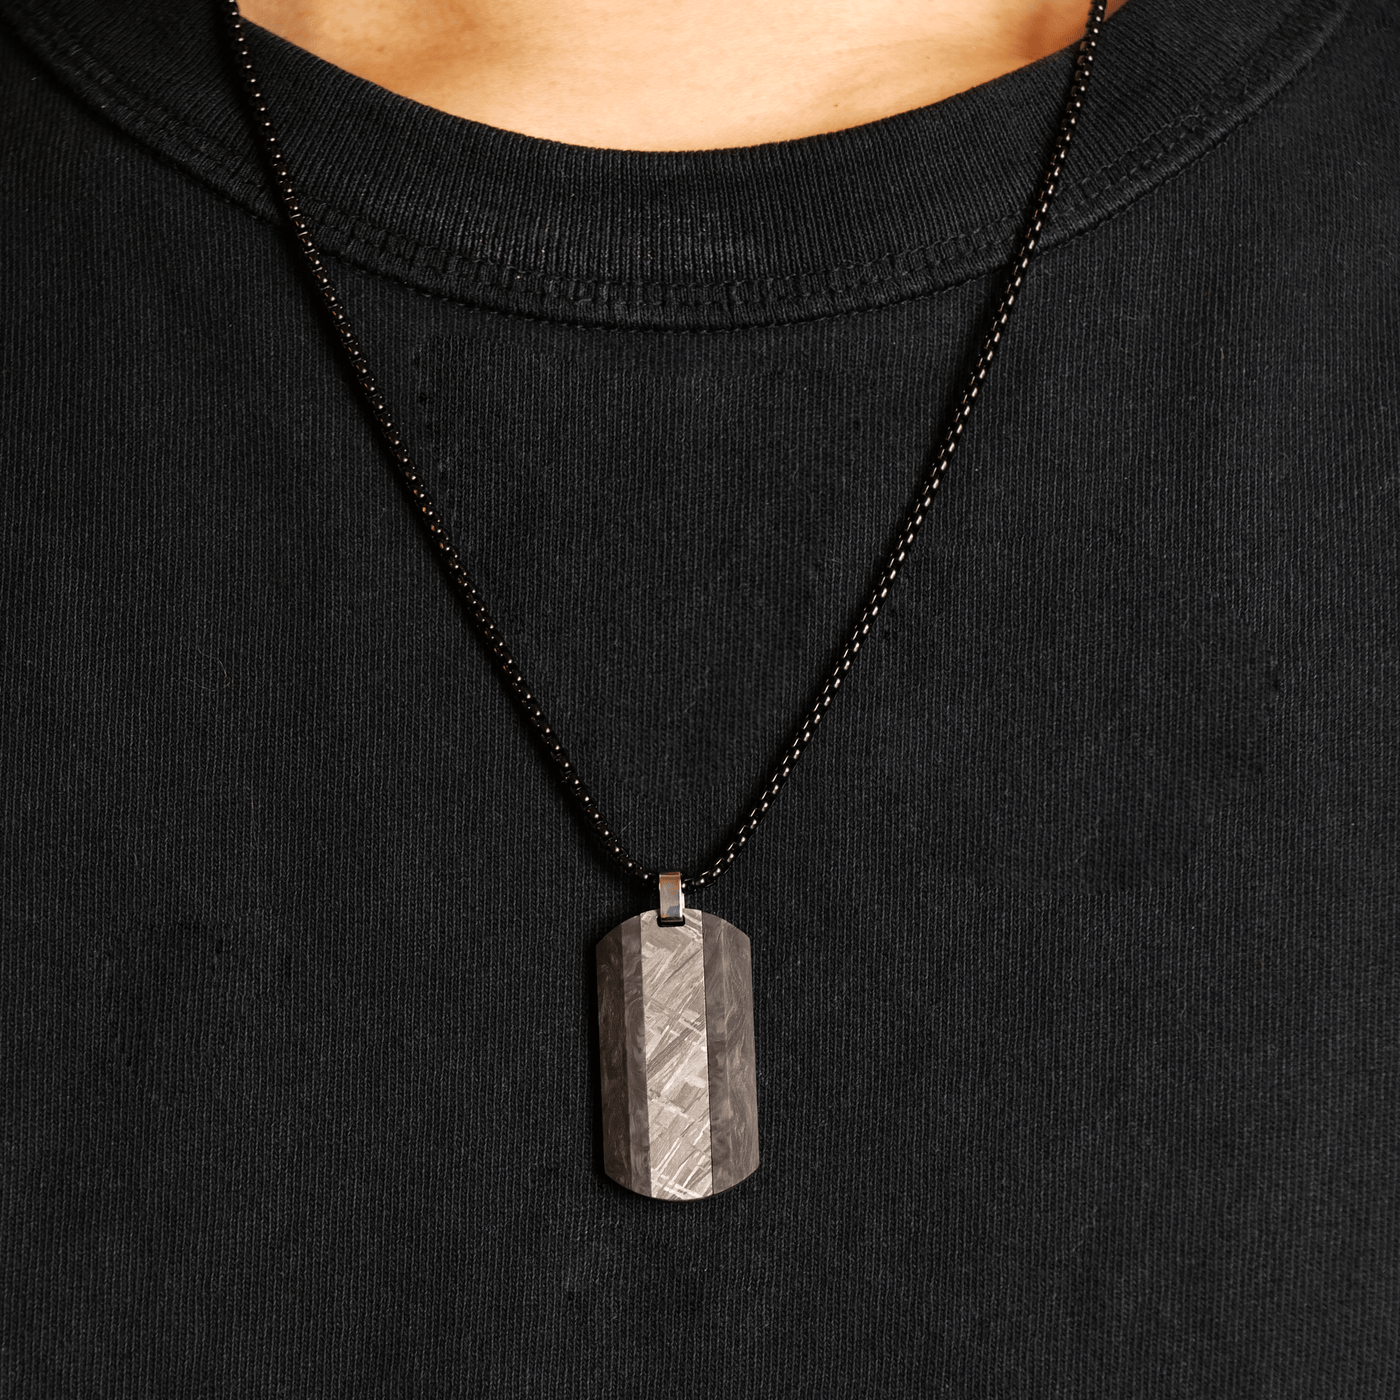 Forged Carbon Fiber and Meteorite Dog Tag Pendant